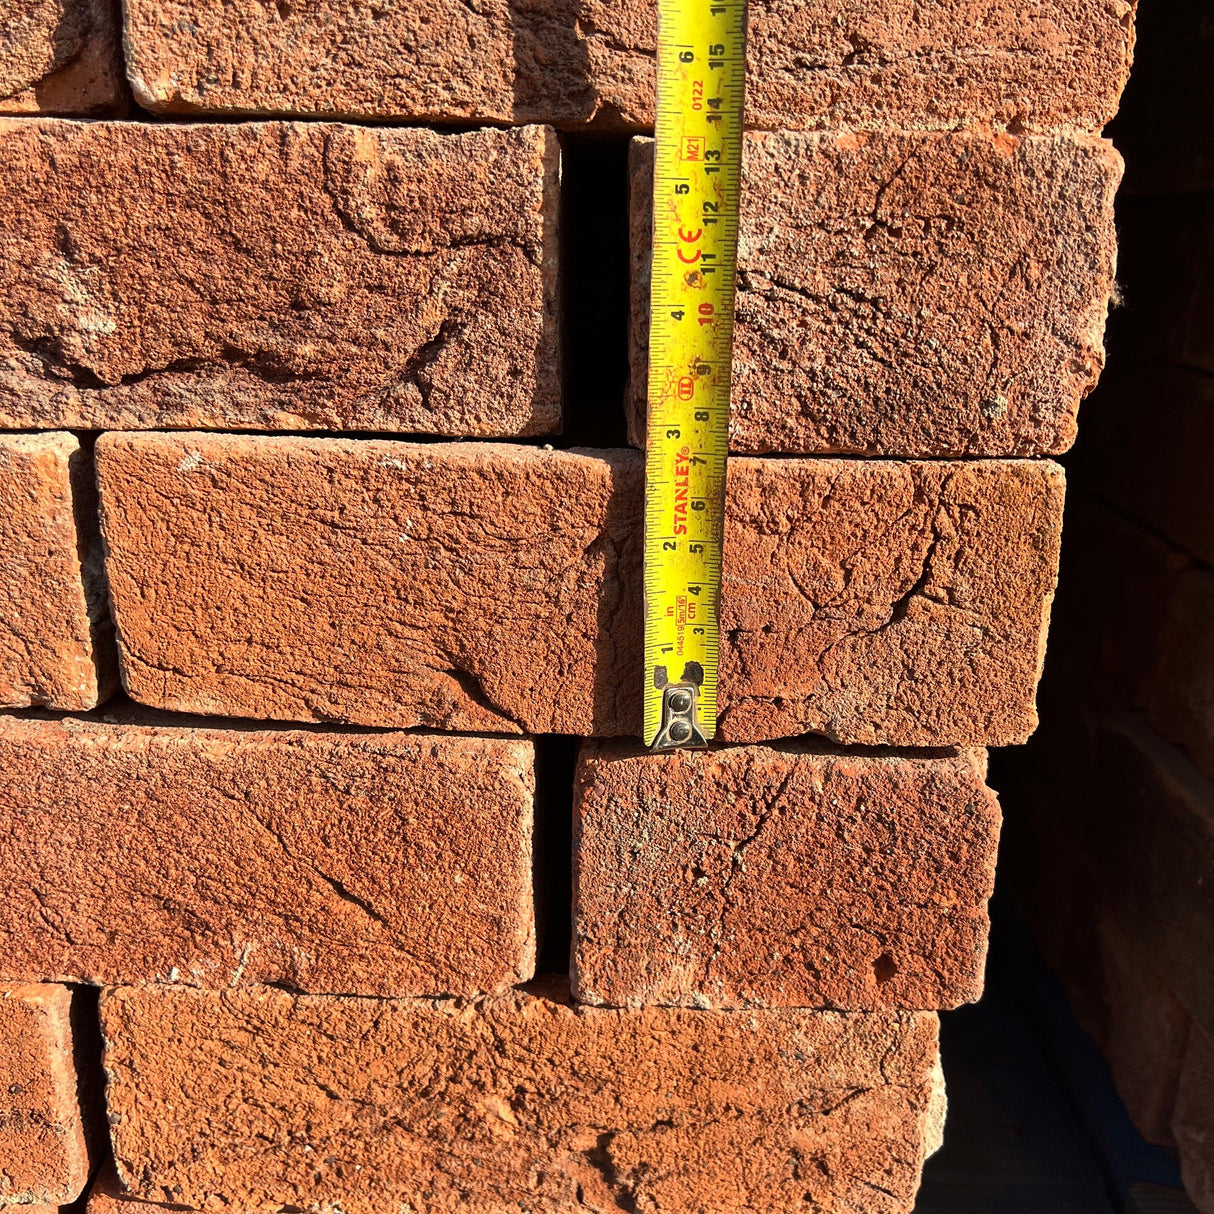 Weathered Reclaimed Brick ideal for architectural projects - Reclaimed Brick Company